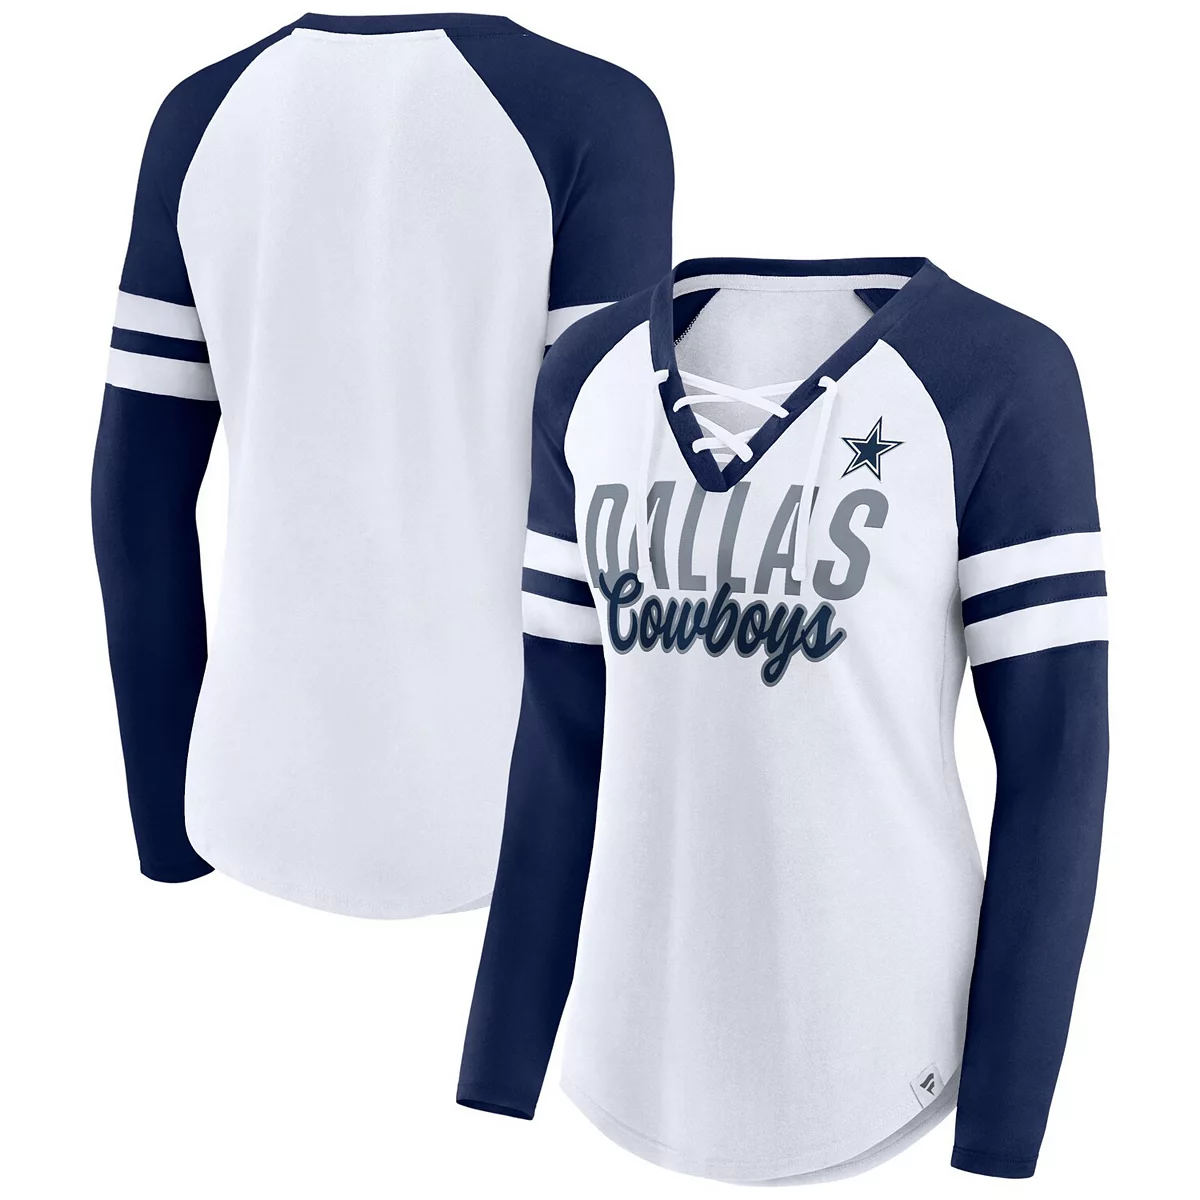 Dallas Cowboys Women's True to Form Lace-Up V-Neck Long Sleeve 22 / XL